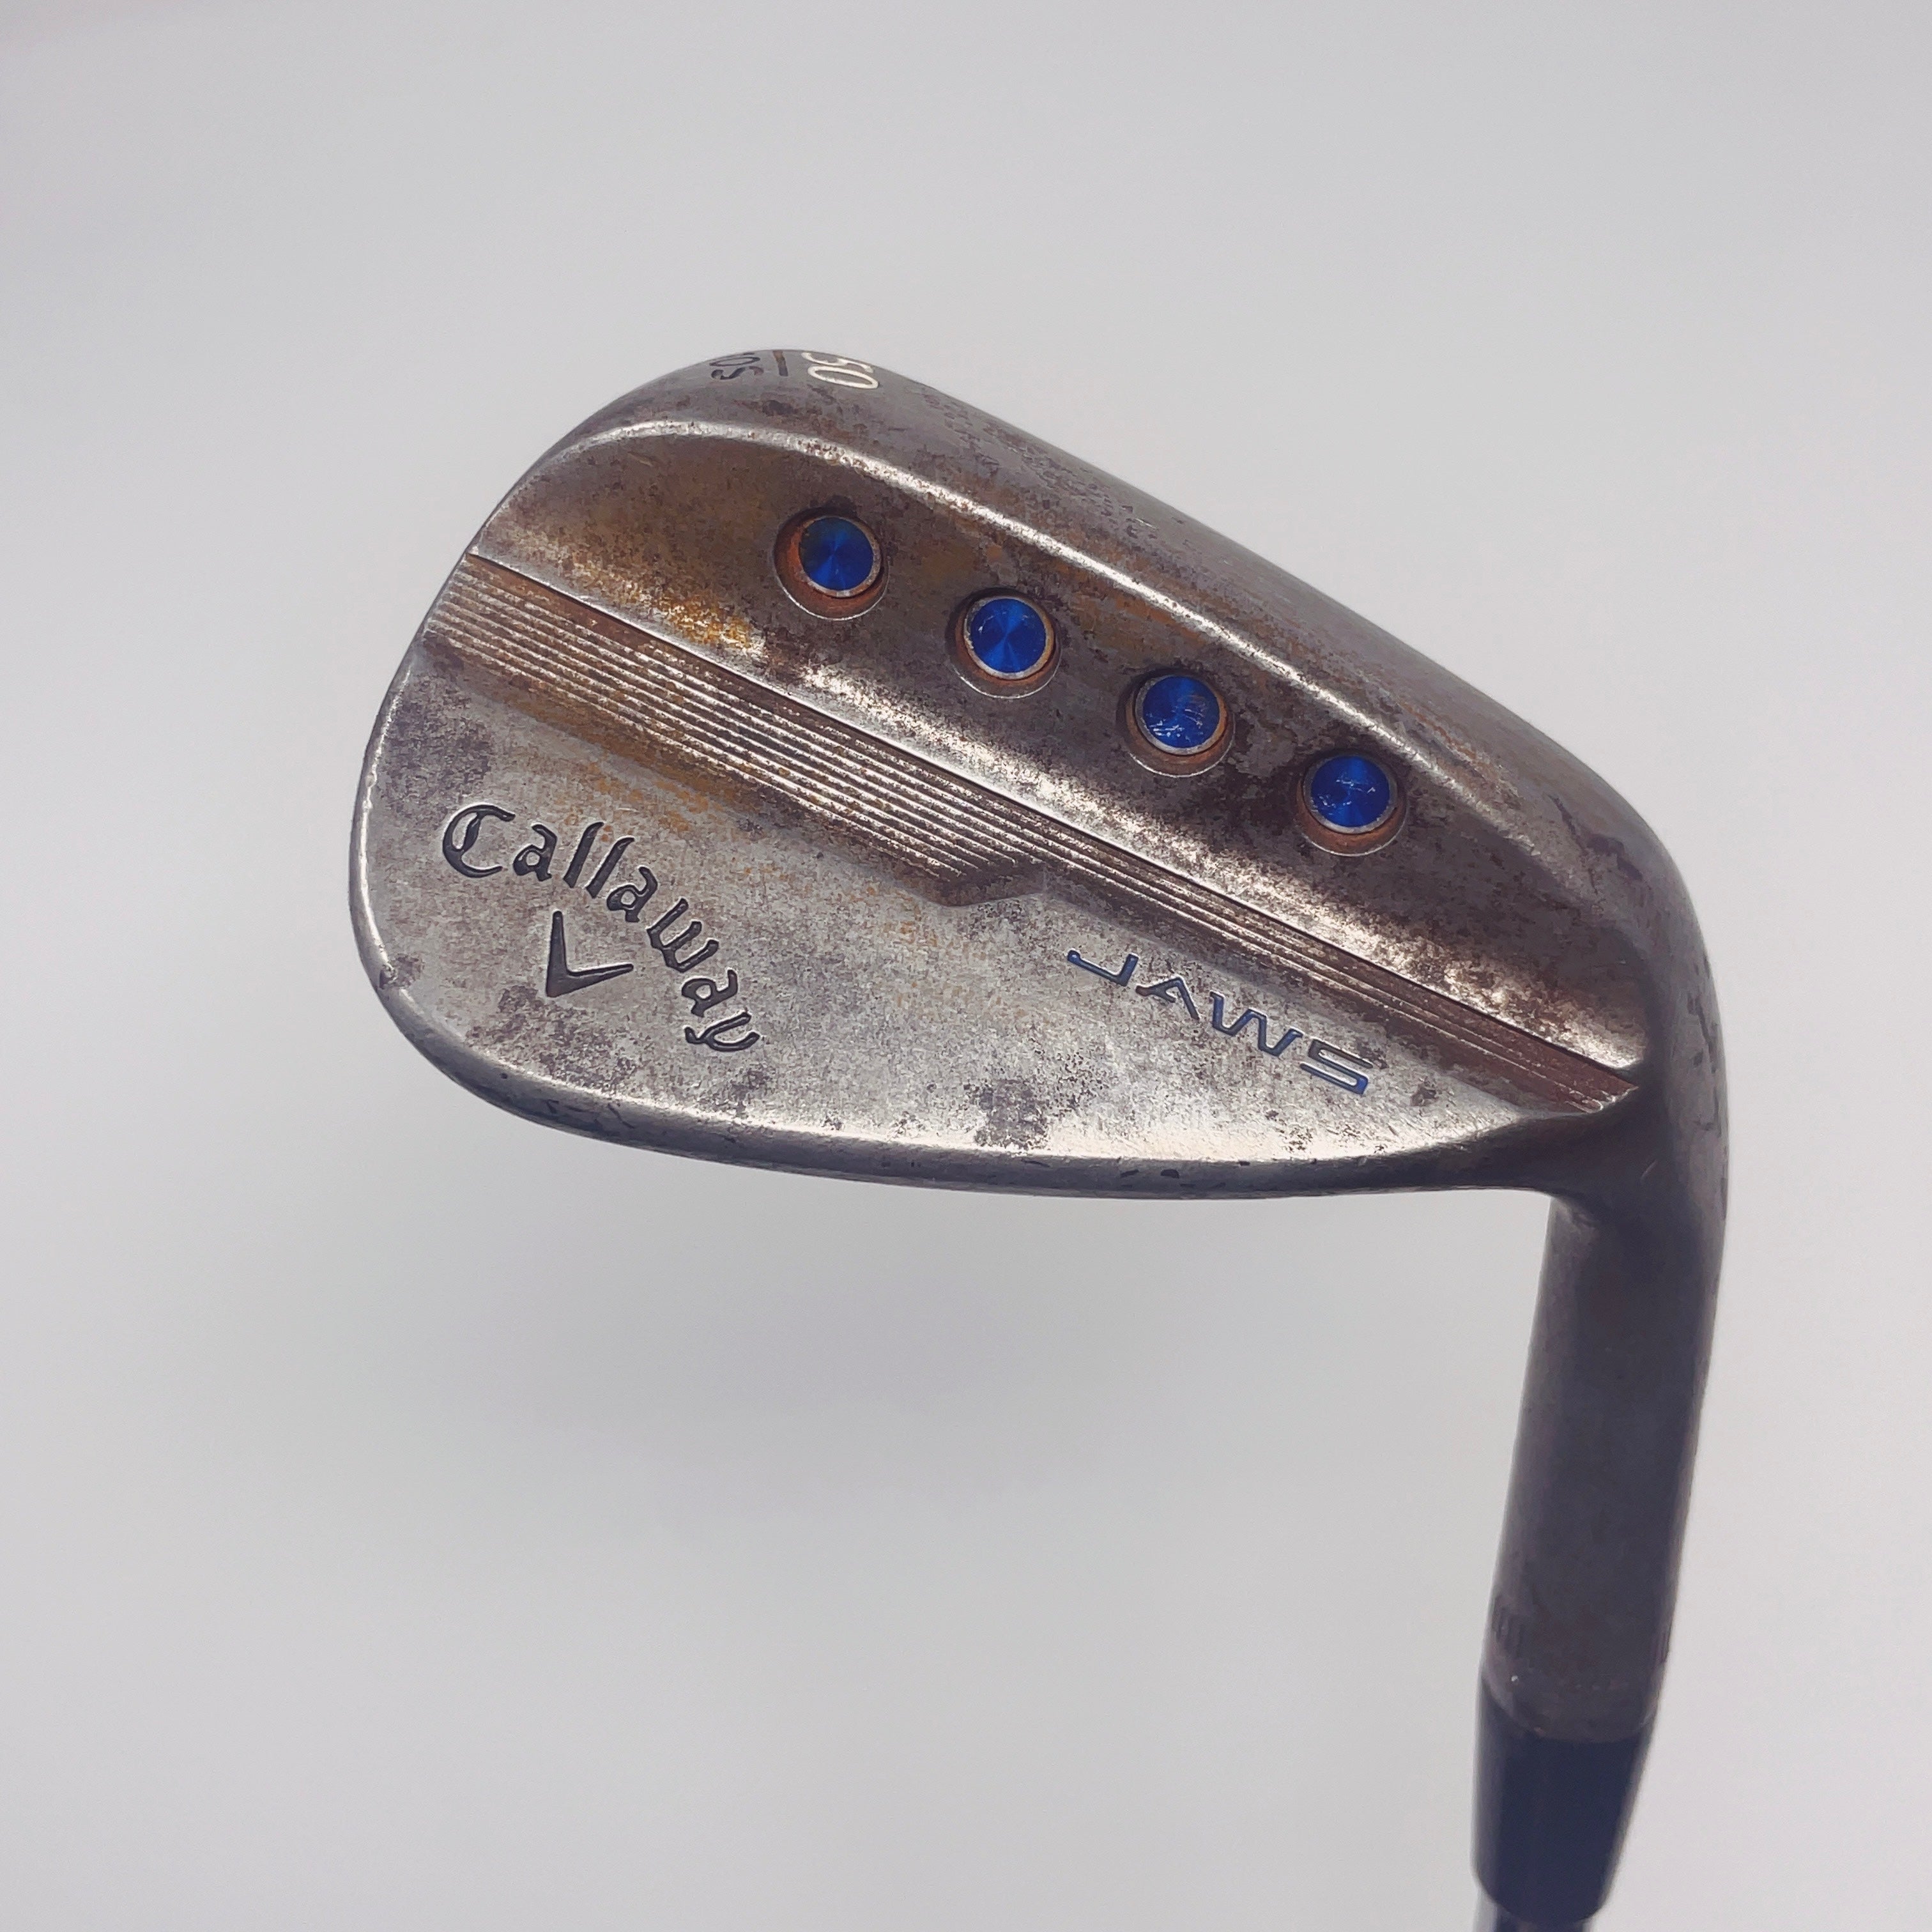 CALLAWAY MD5 RAW WEDGE / 50-10 S GRIND / DYNAMIC GOLD TOUR ISSUE S400 SHAFT